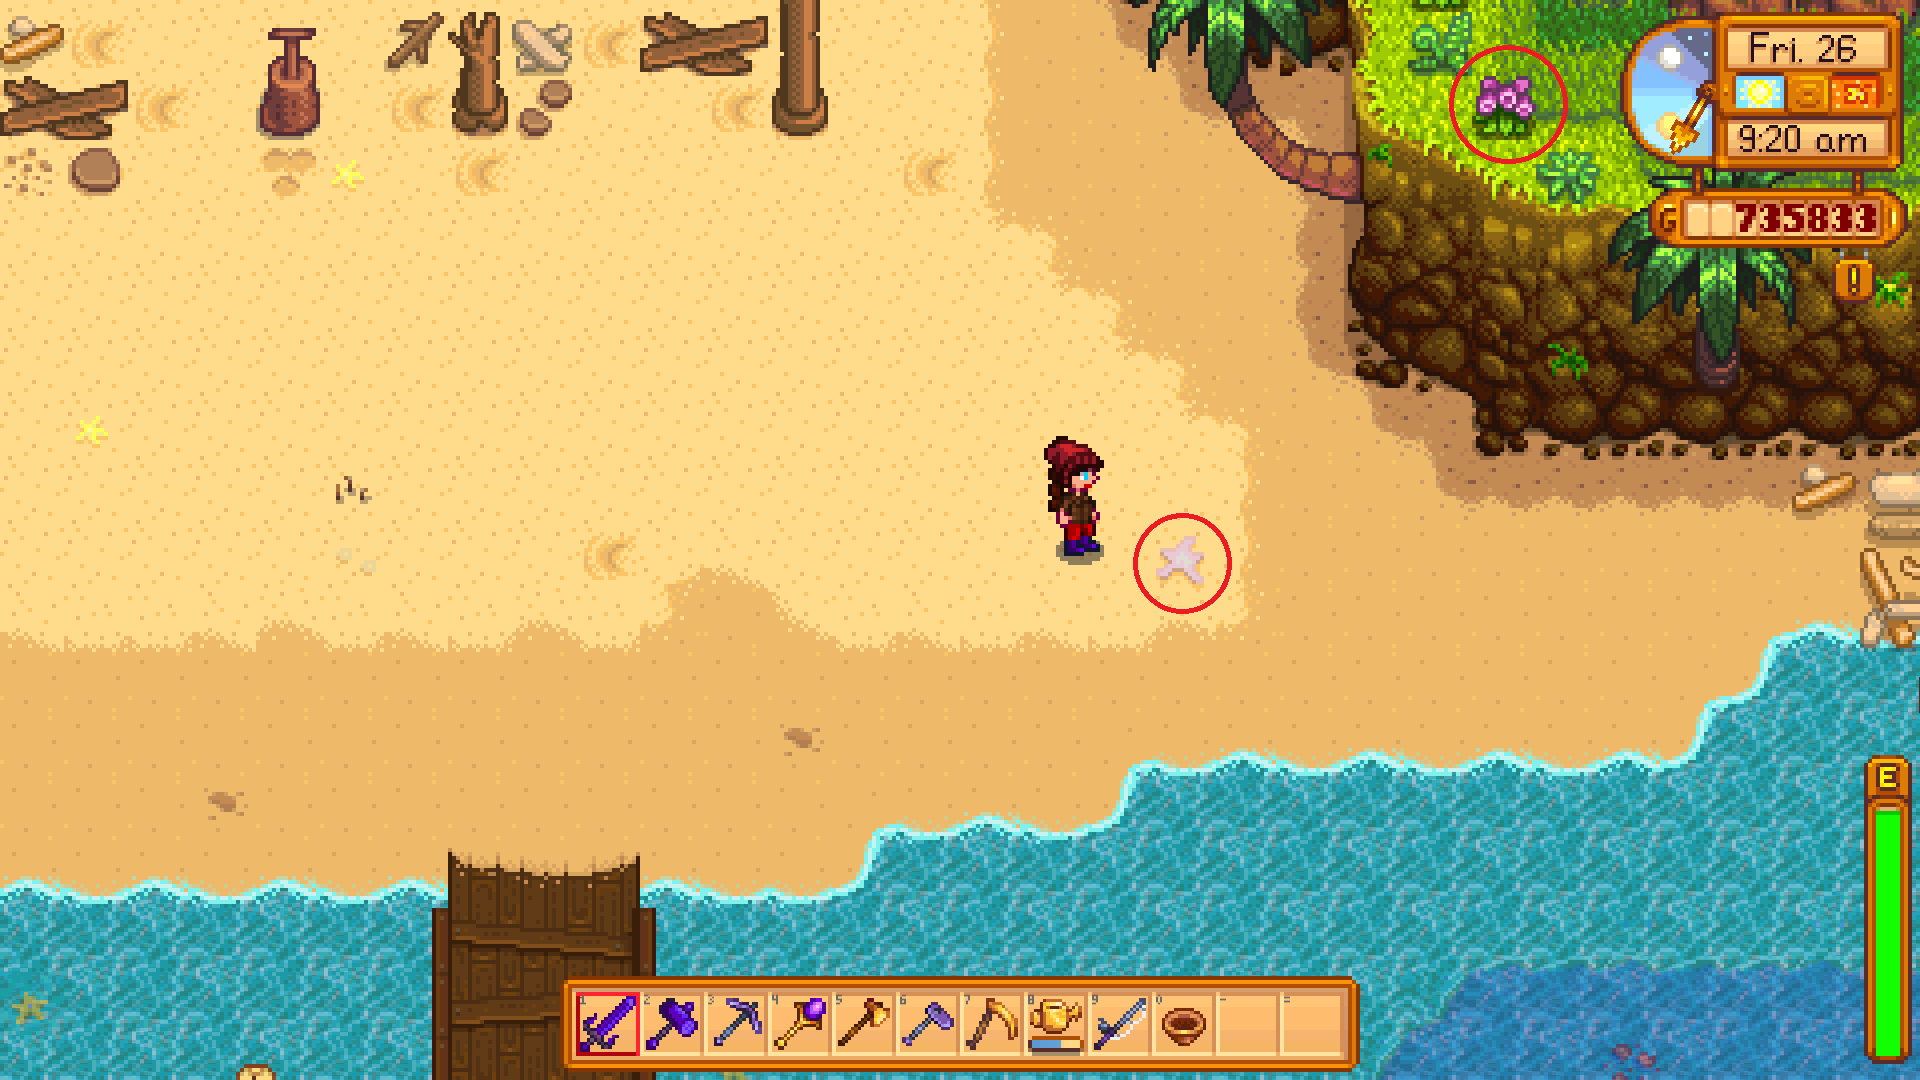 A character stands on the beach at Stardew Valley's Ginger Island, looking at a circled purple starfish.